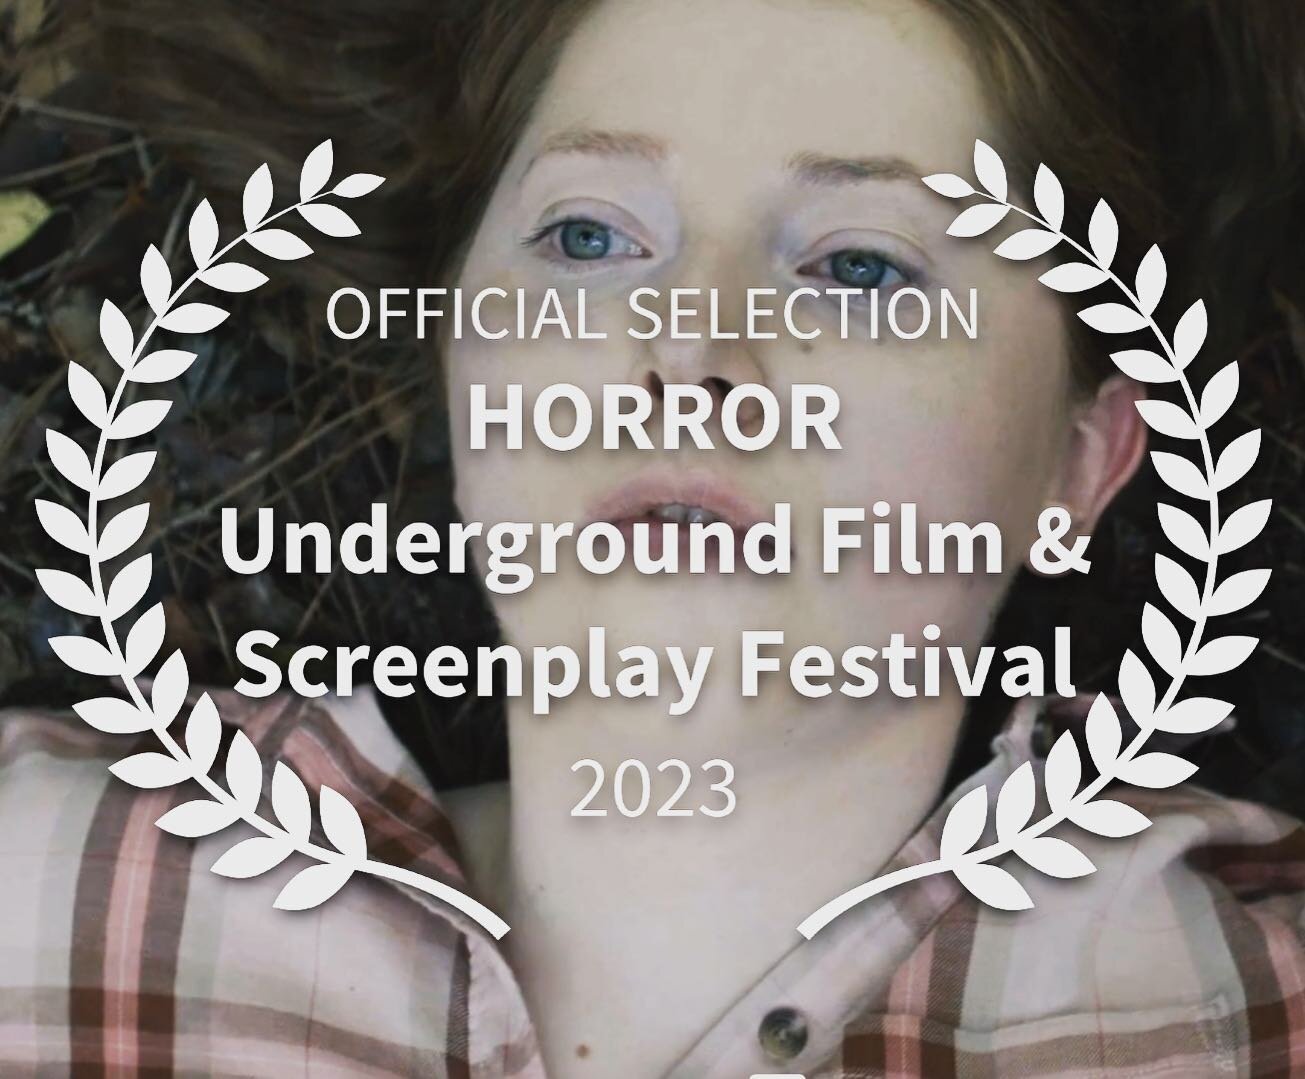 Congrats to the cast and crew of of the horror short, VIOLAR for another festival selection!

@rollingrolling305 @jake_jalbert @jilljgalbraith @adamleekitchen88 @mullen.dawson @risathepuffin @__bgofficial @grahamzmedia @kaitlyn___may @__vic73  @berli